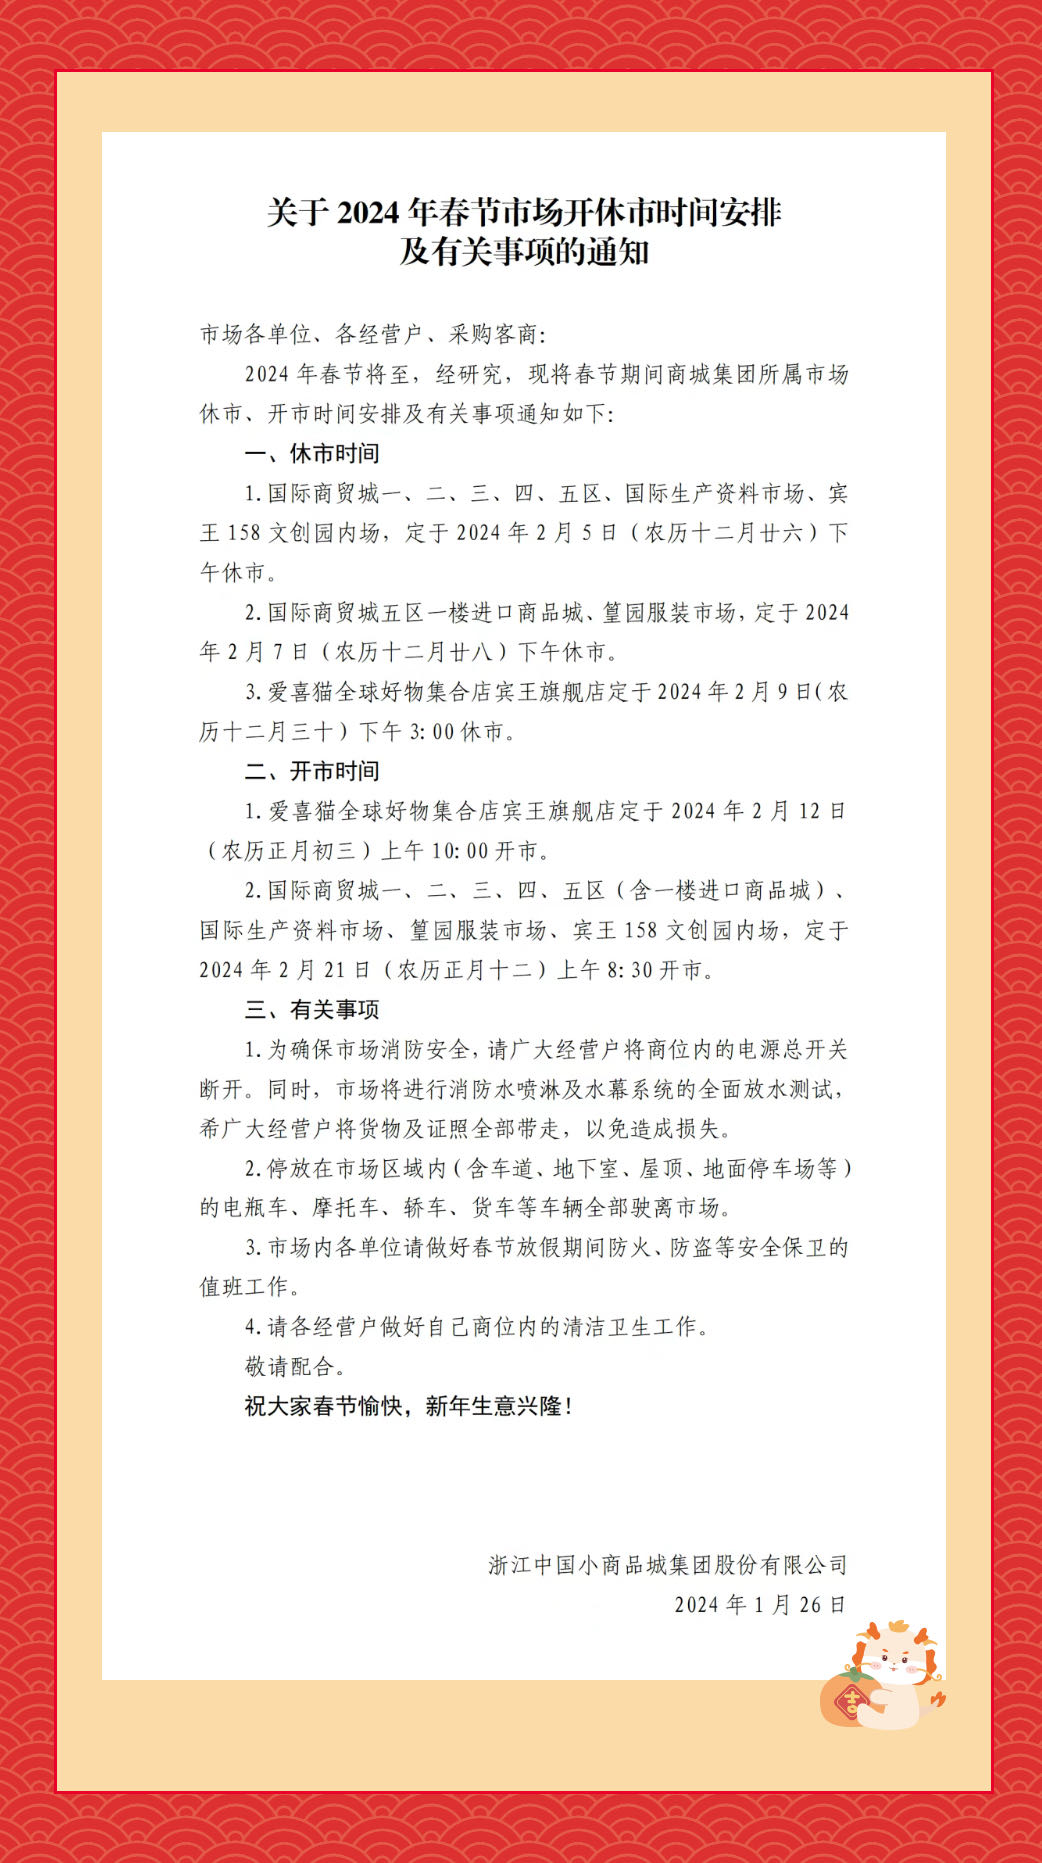 2024 CNY (Chinese New Year) Holiday Yiwu Market Close Date Notice, In Chinese